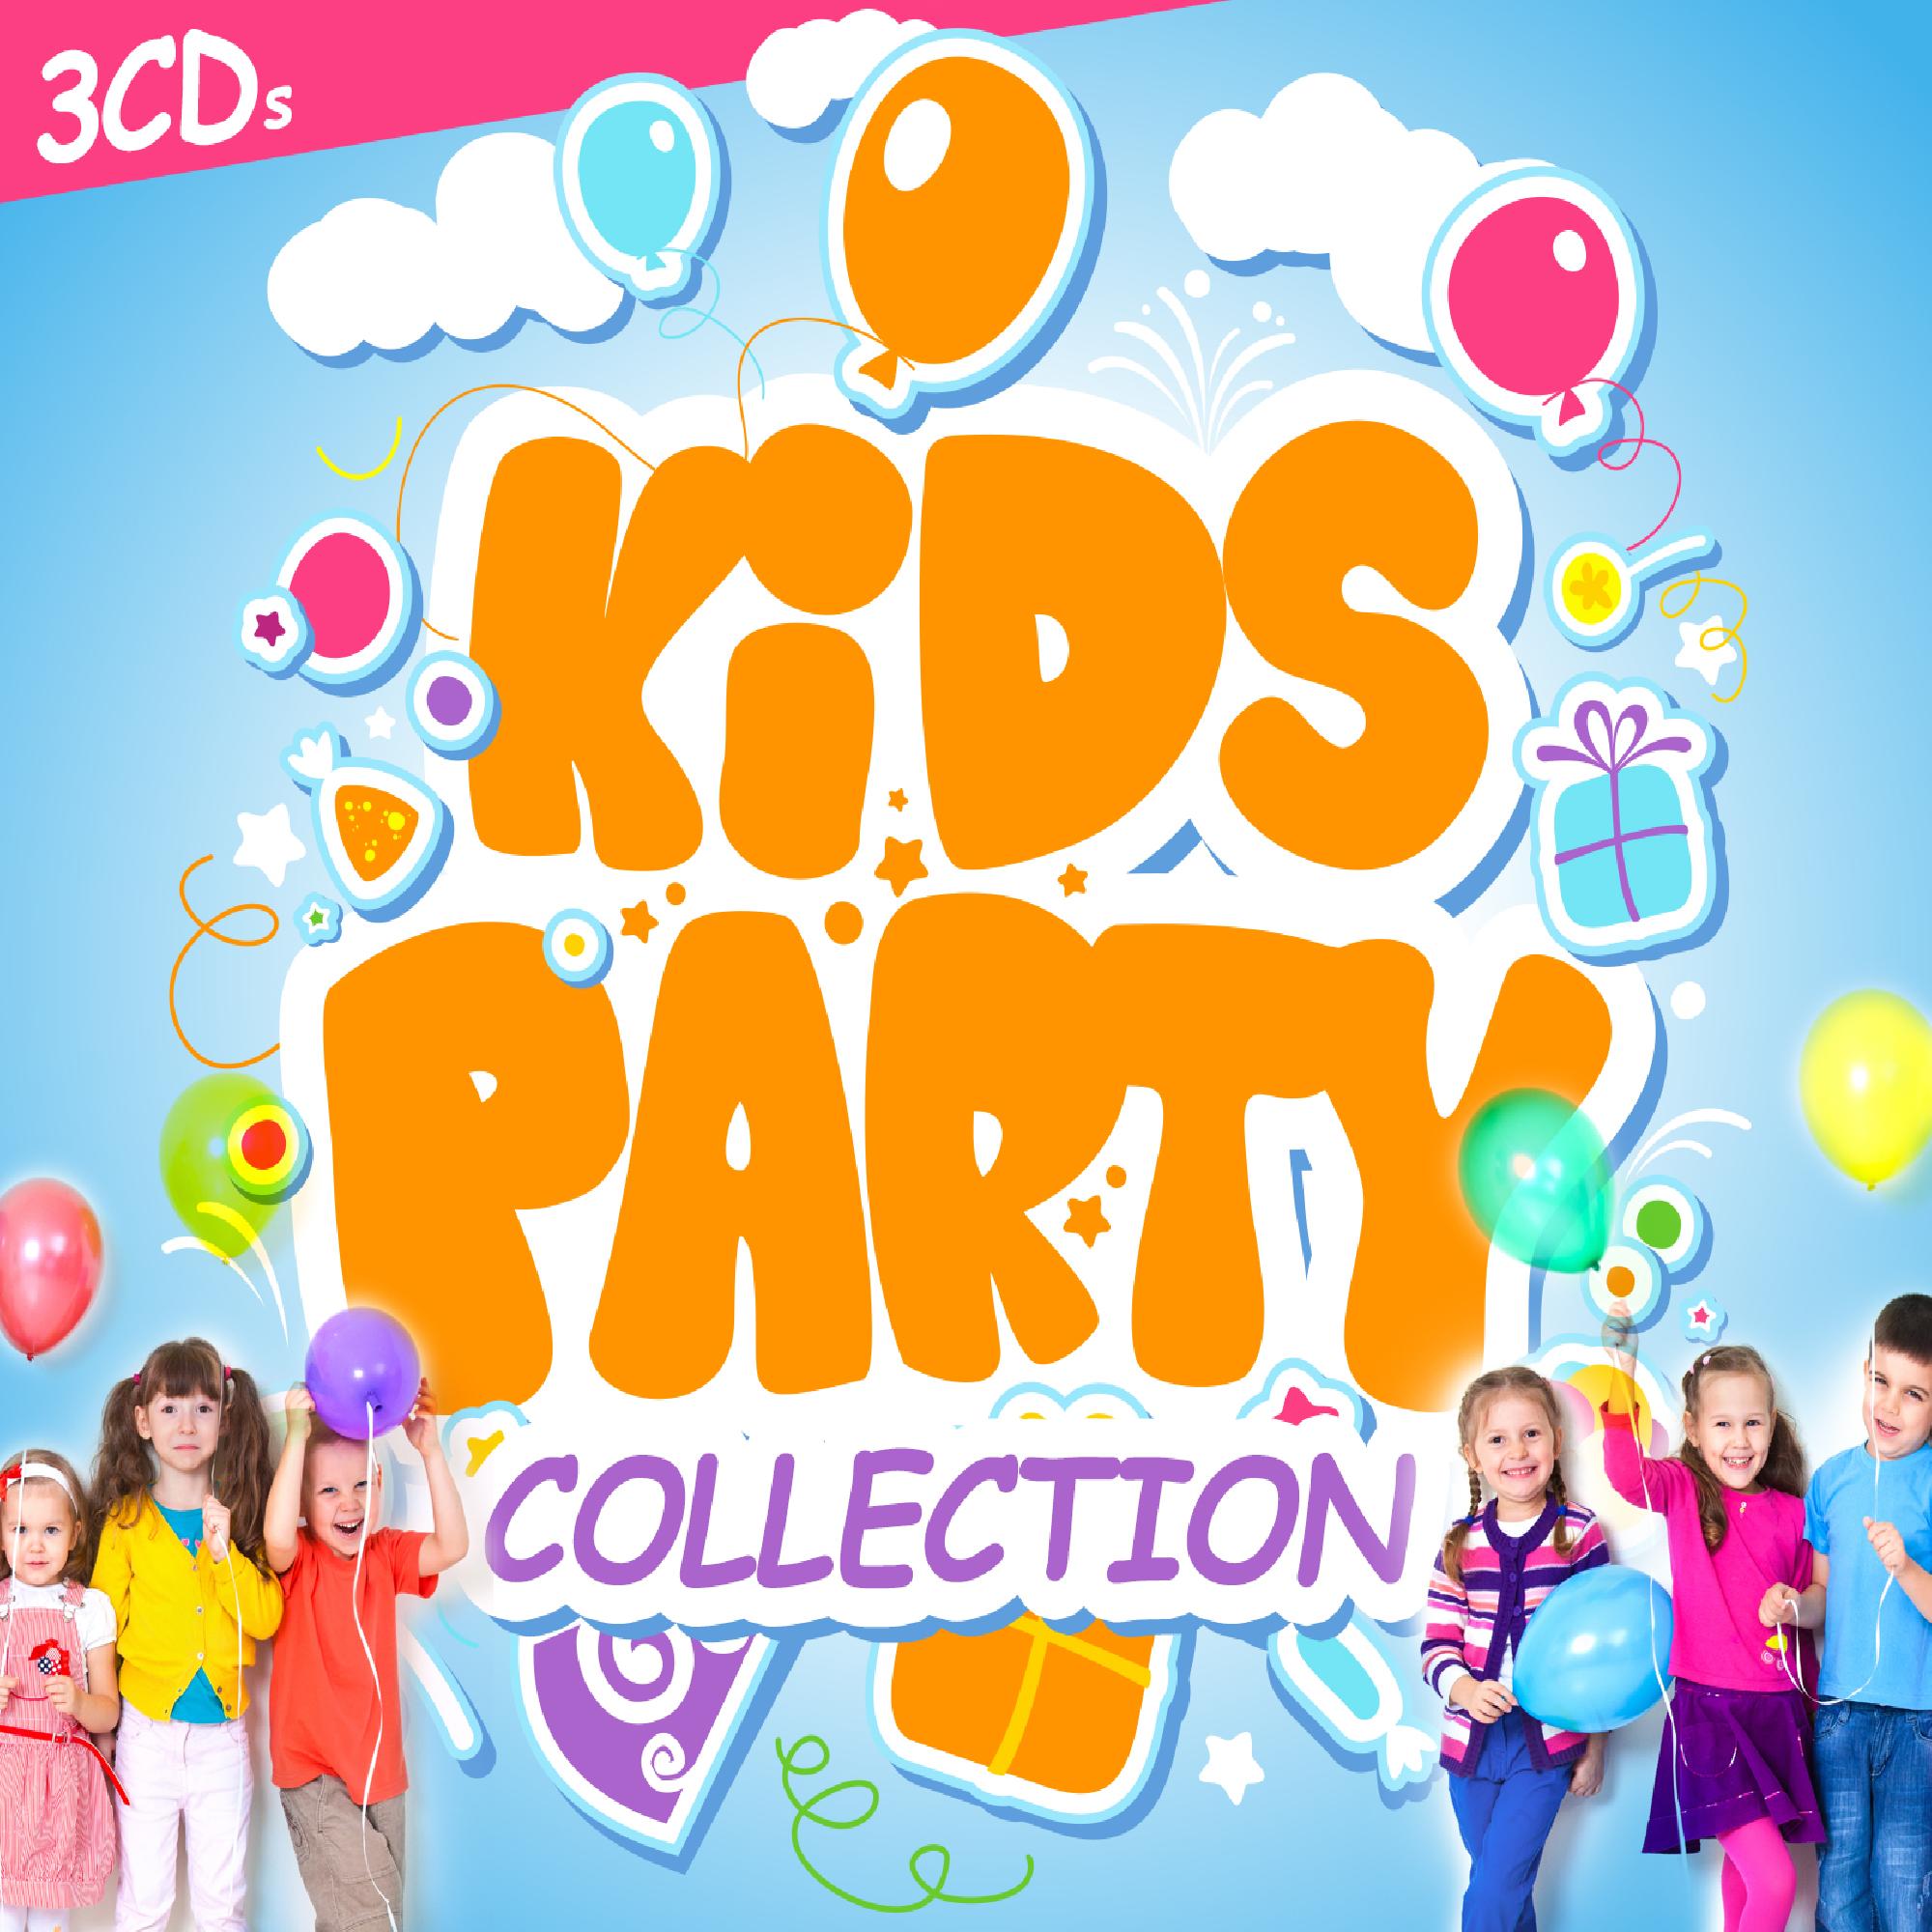 Party collection